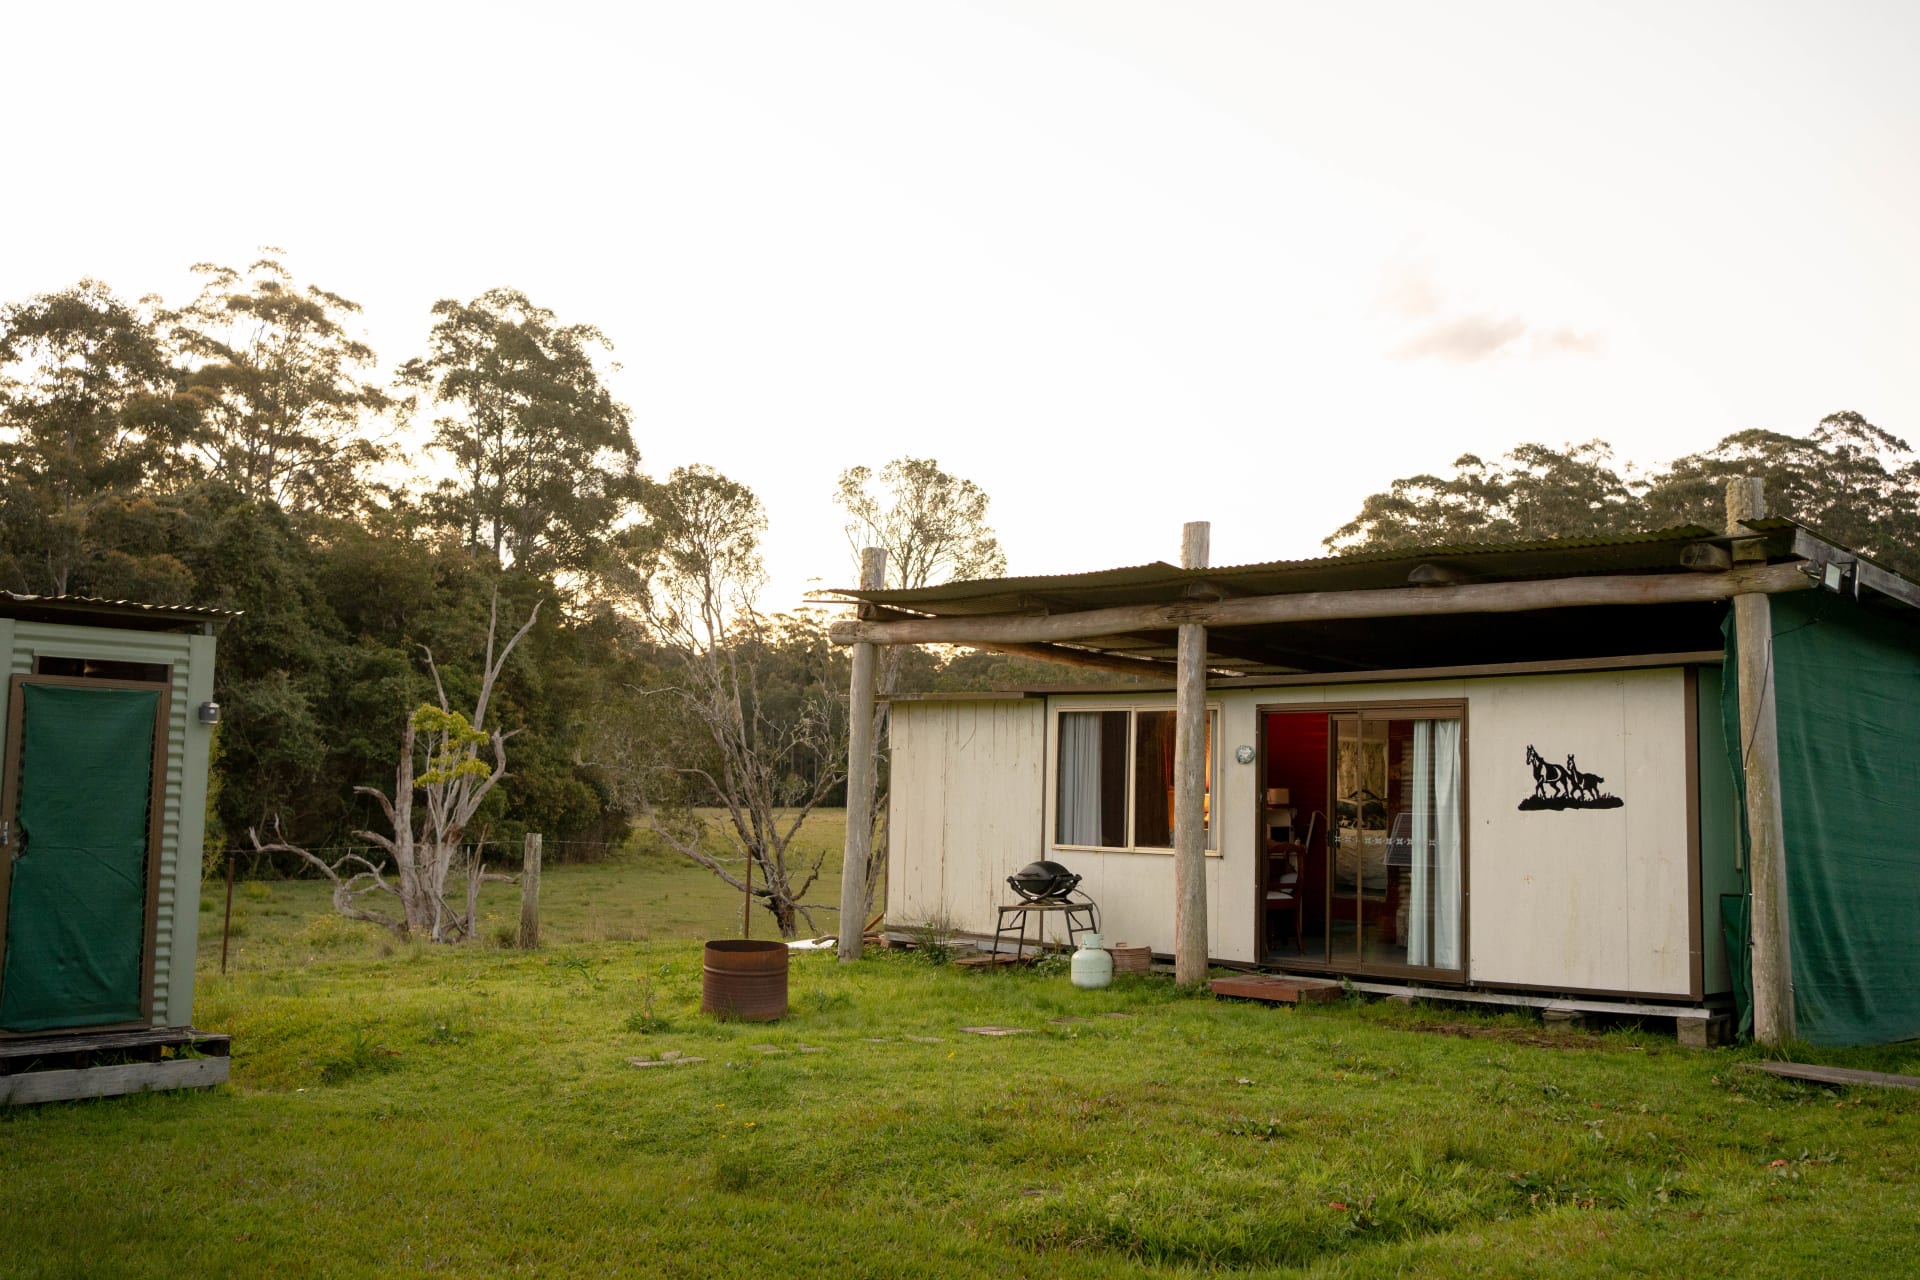 Stoney Creek - Hipcamp in Boolambayte, New South Wales